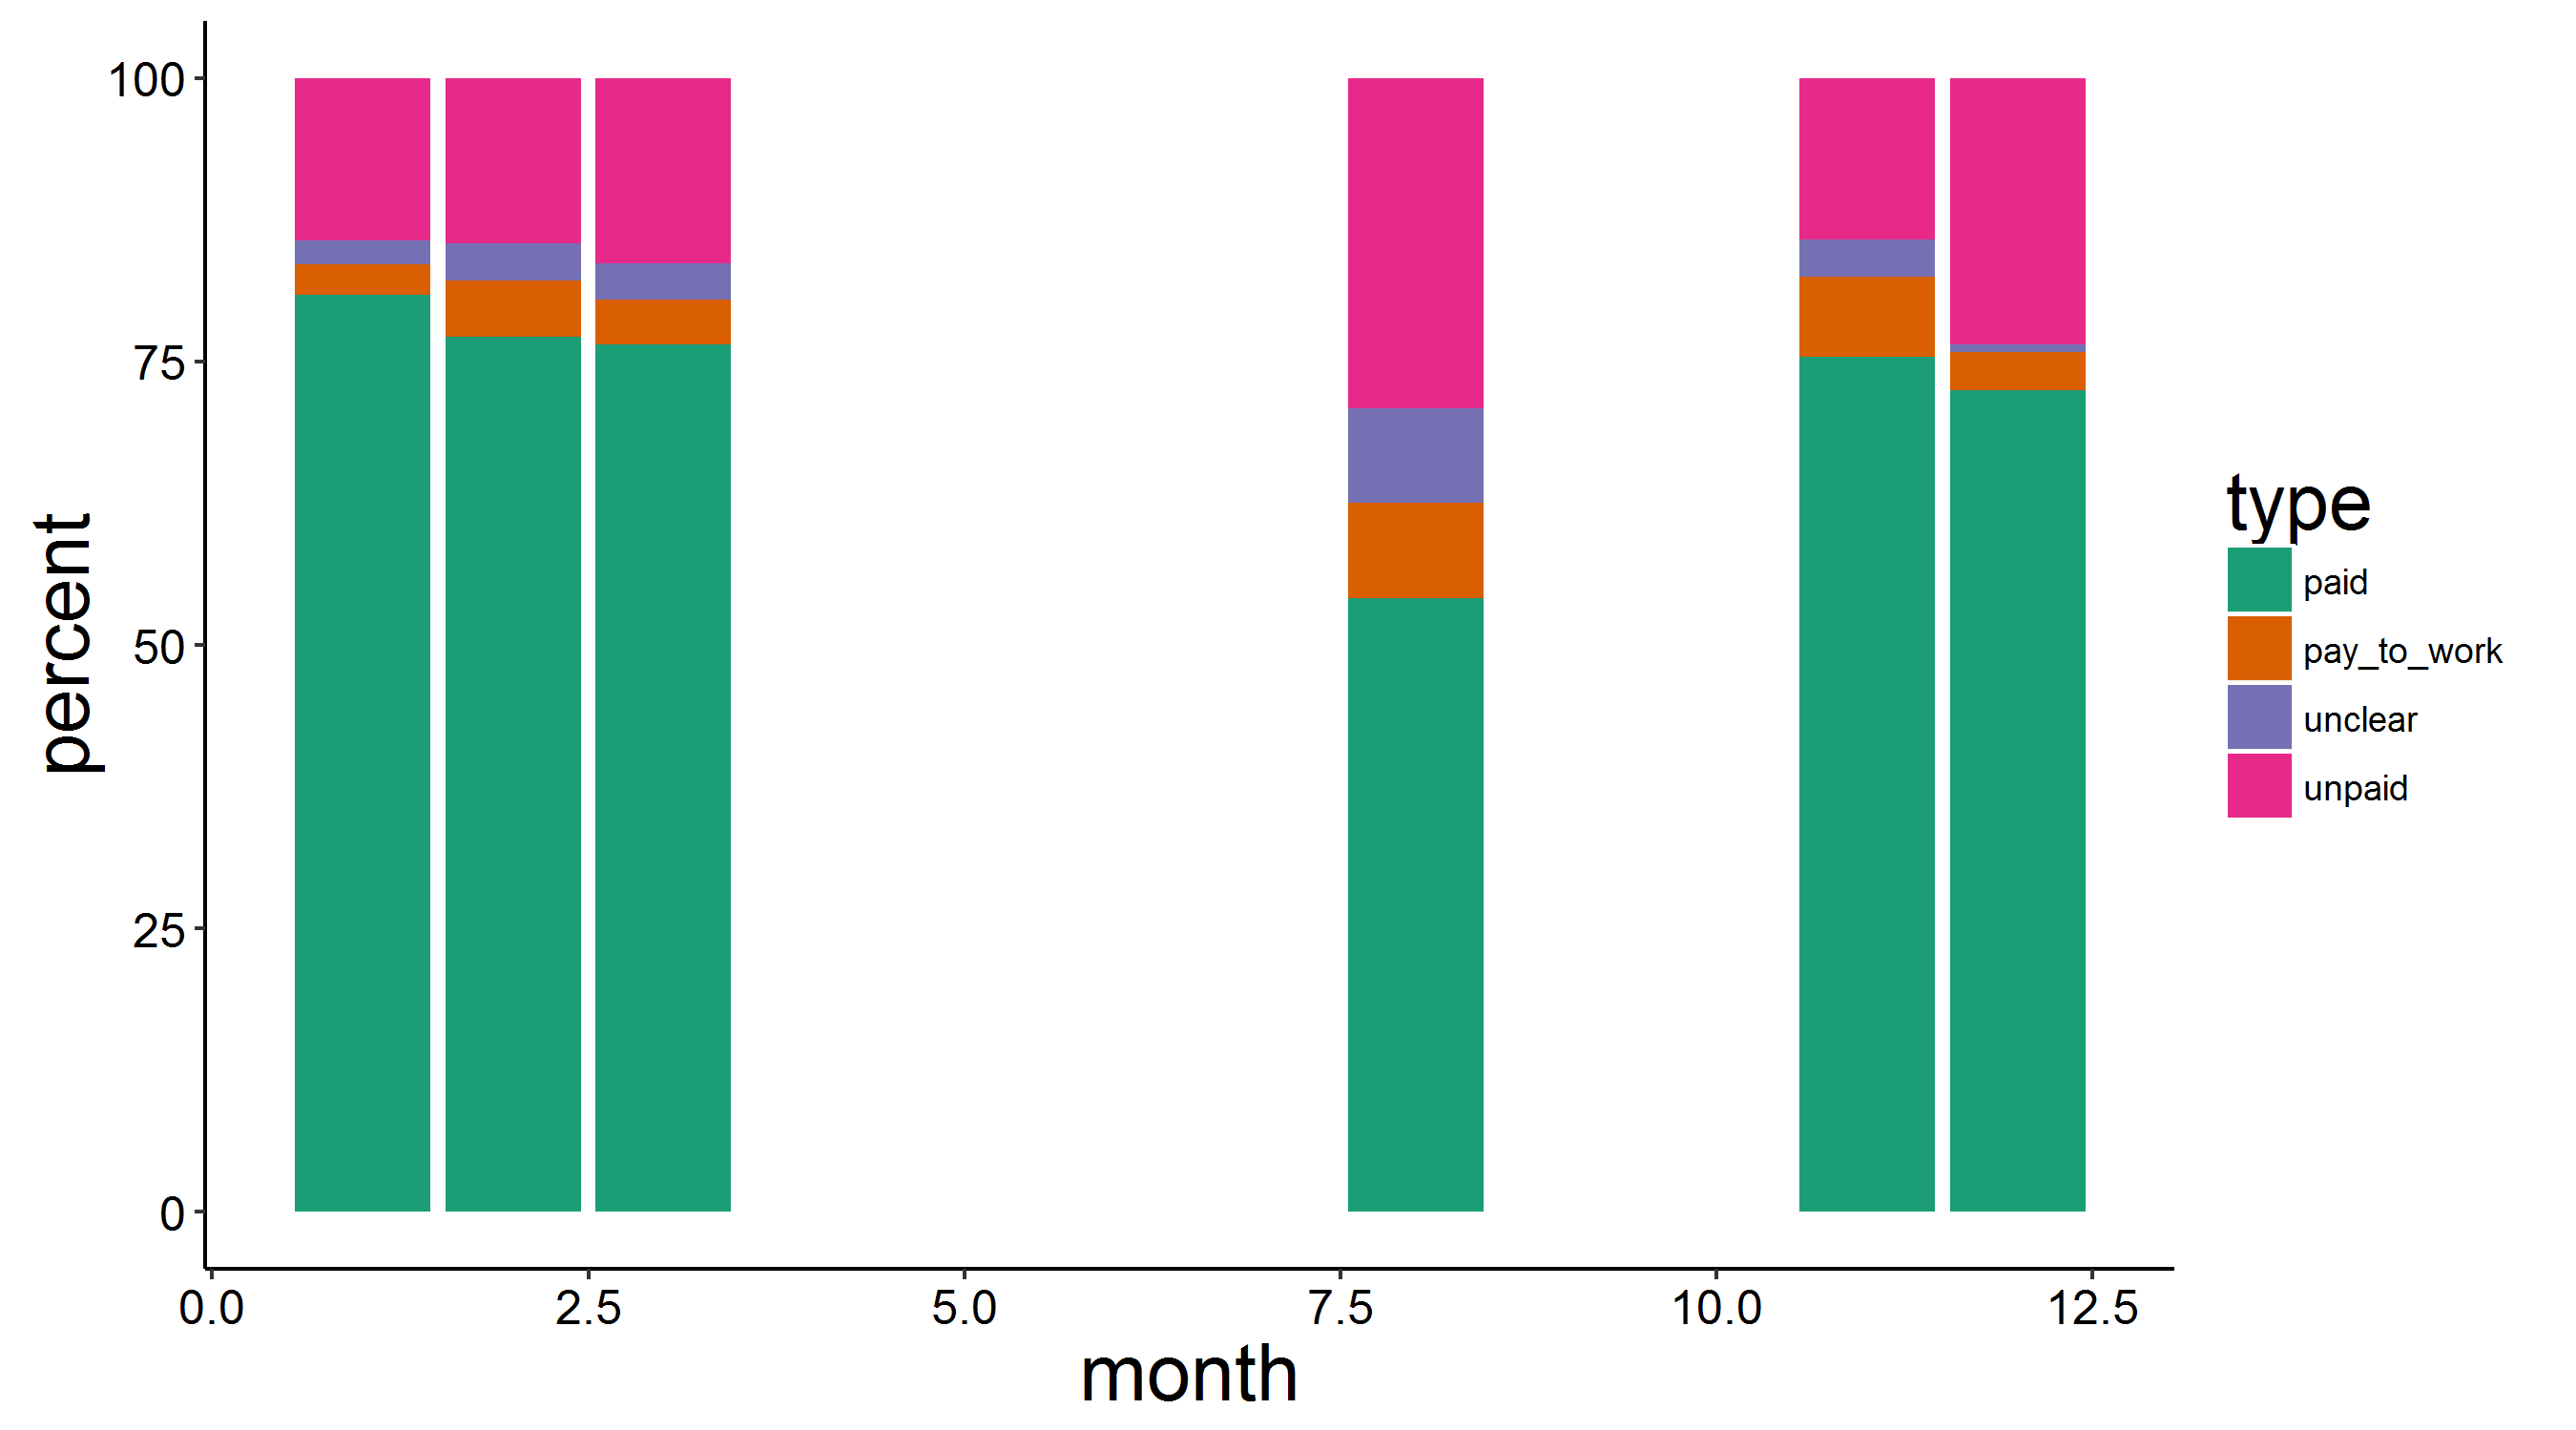 figure2_new_by_month.png